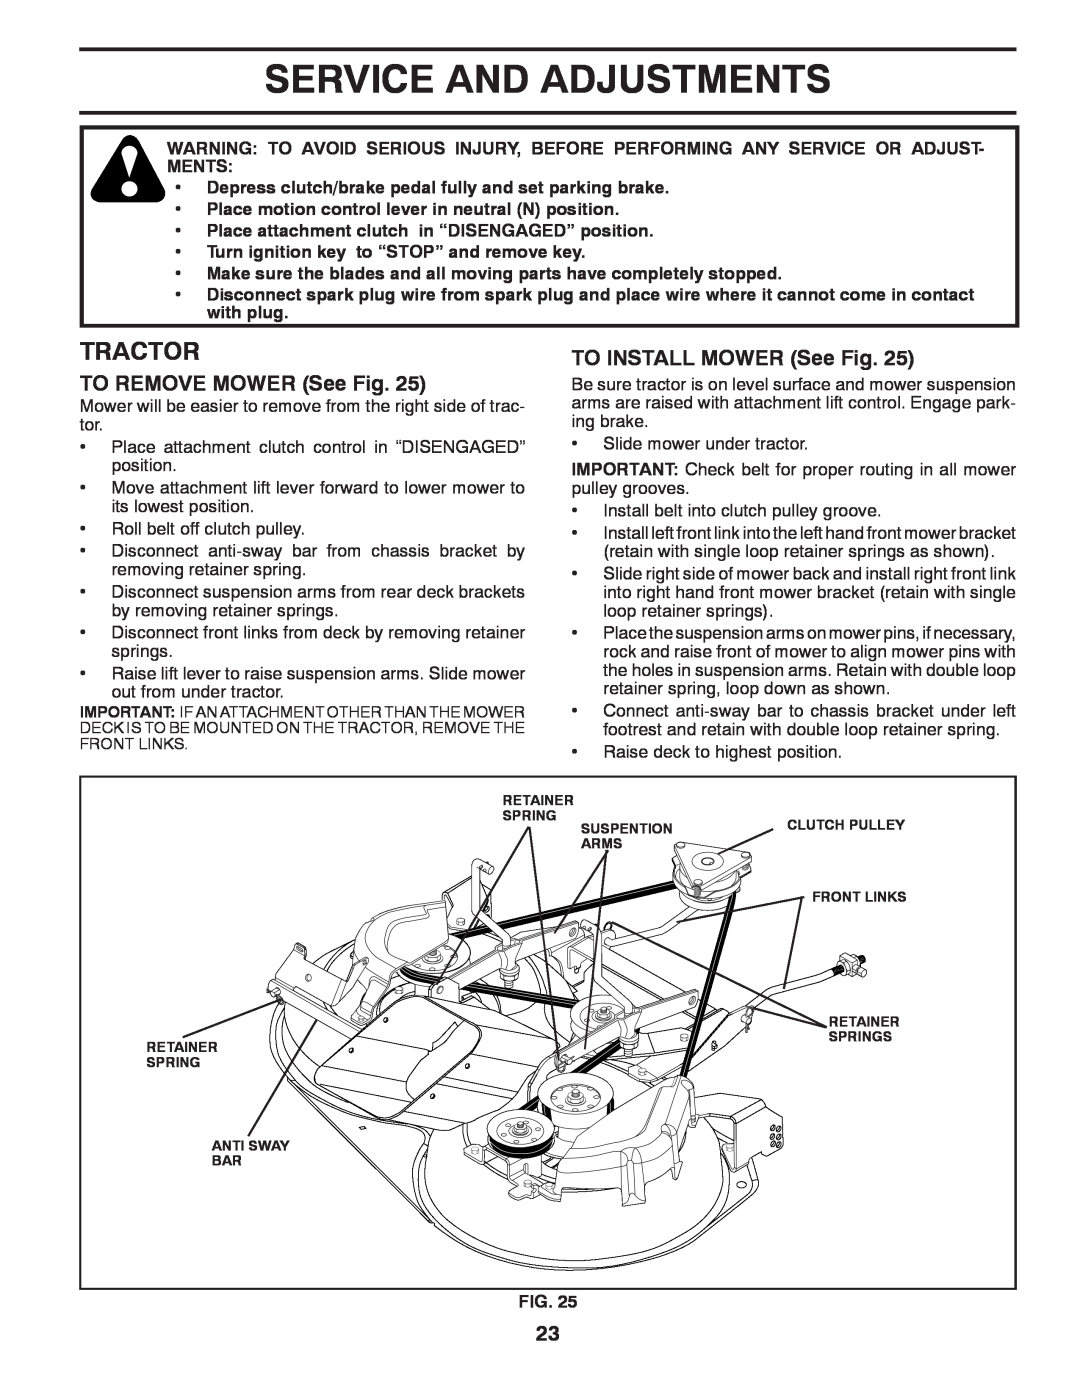 Husqvarna CTH2036 TWIN owner manual Service And Adjustments, TO REMOVE MOWER See Fig, TO INSTALL MOWER See Fig, Tractor 